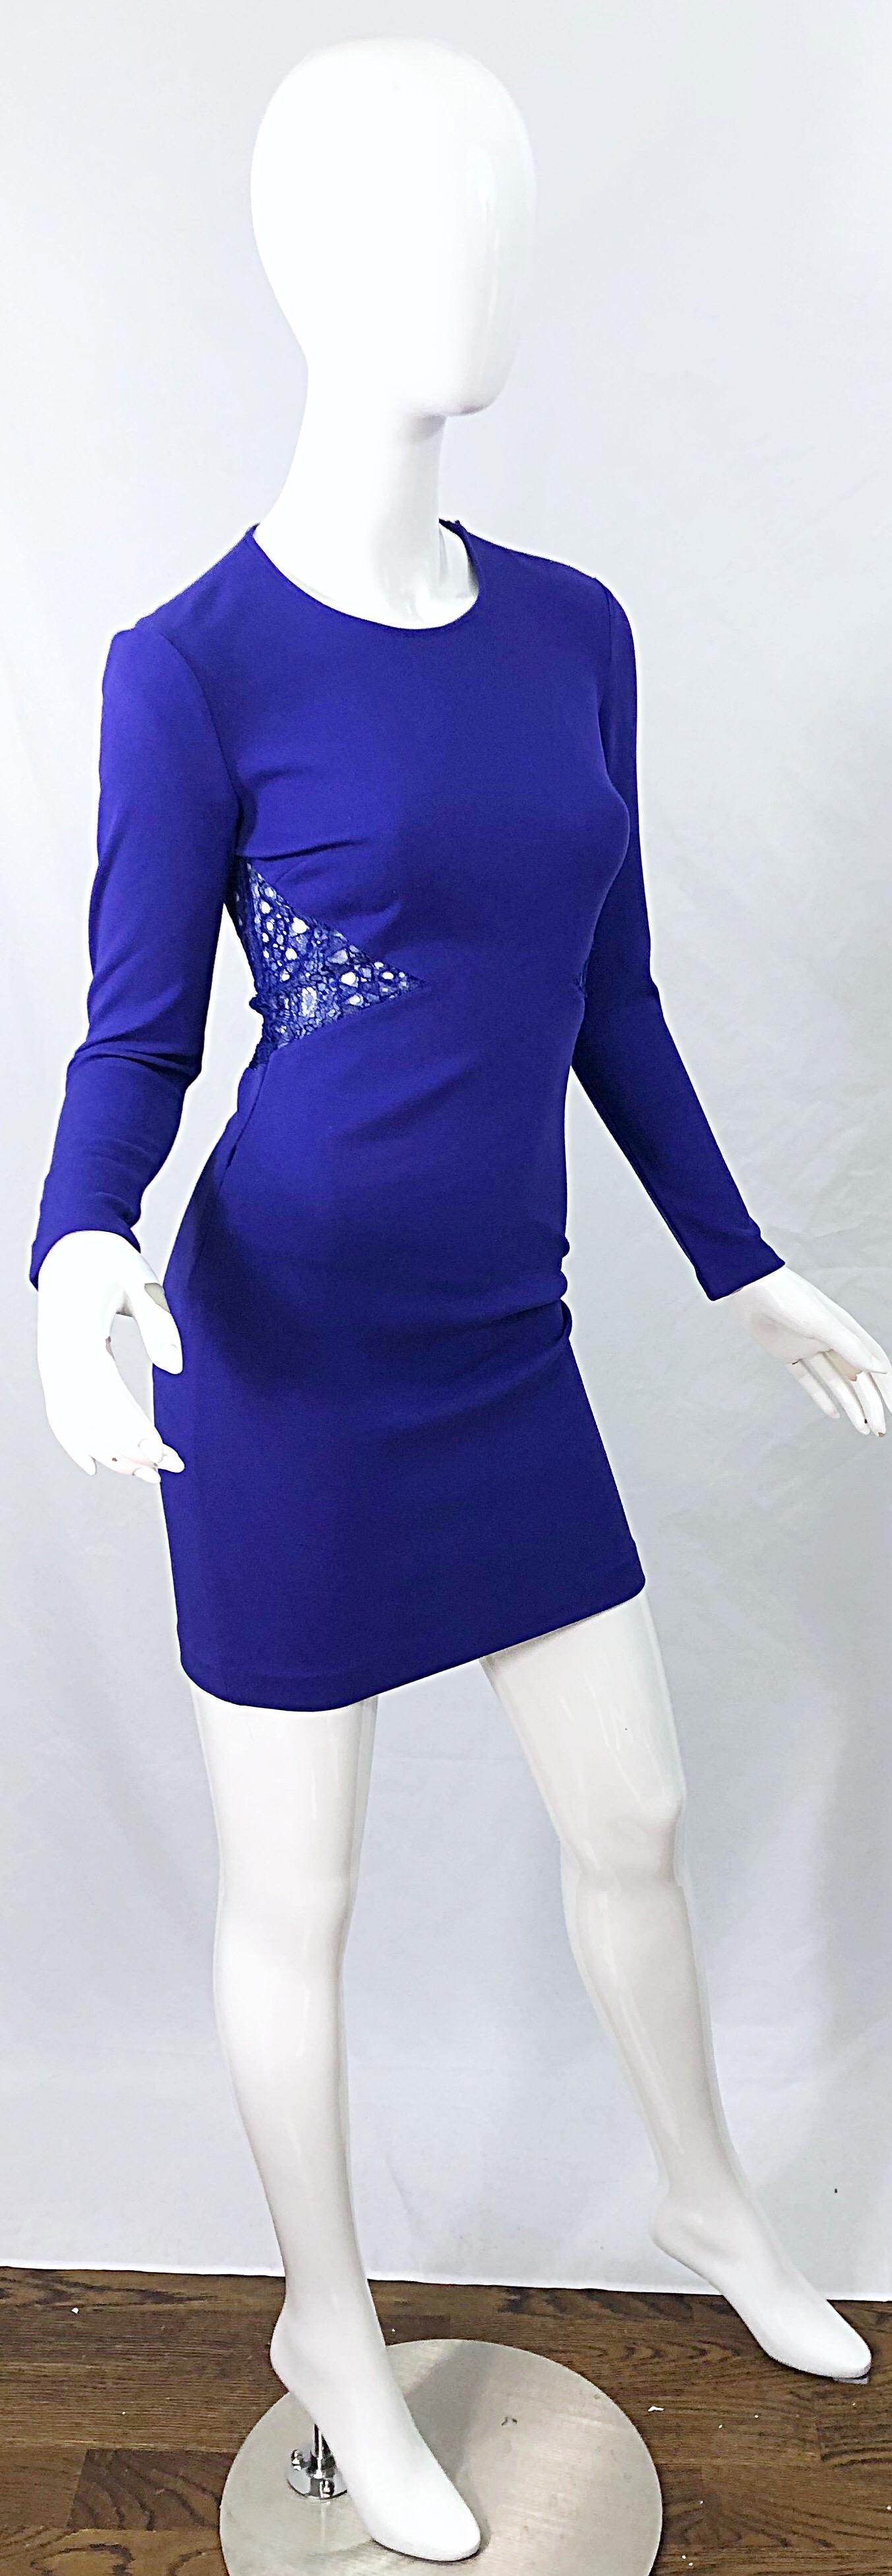 Emilio Pucci Fall 2012 Purple Rayon Lace Cut Out Long Sleeve Bodycon Dress In Excellent Condition For Sale In San Diego, CA